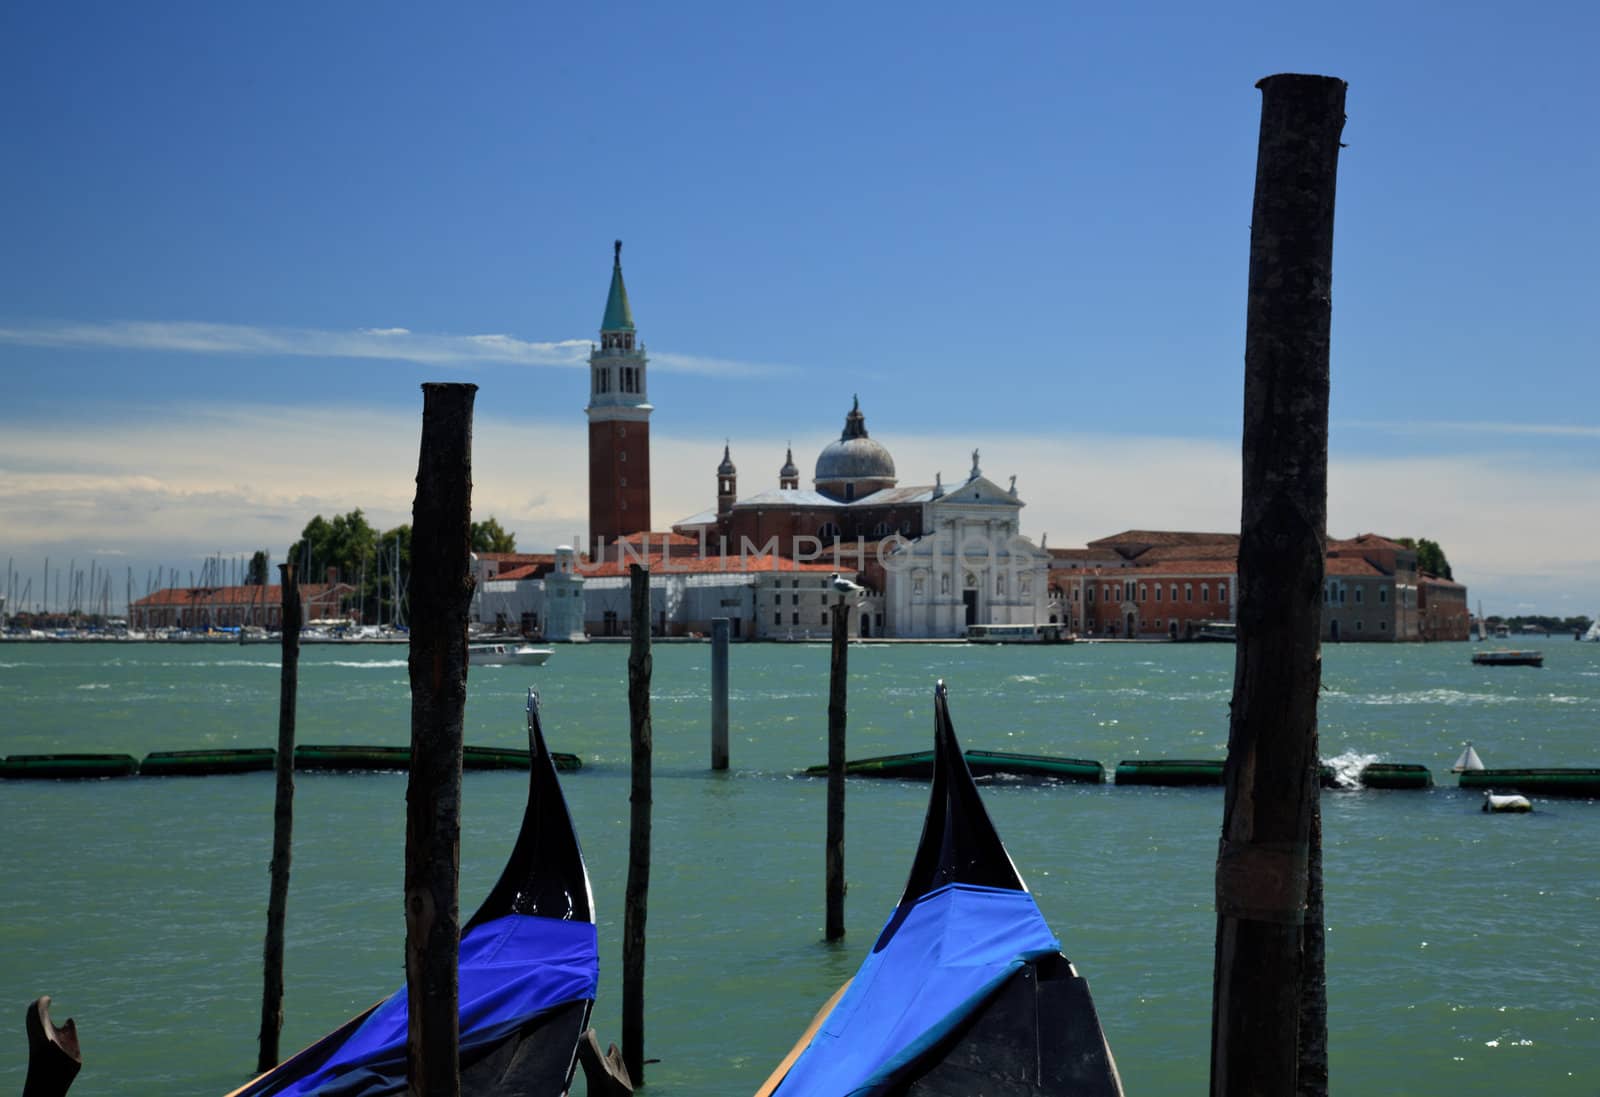 Basilica seen across Grand Canal from St Mark's Square in Venice